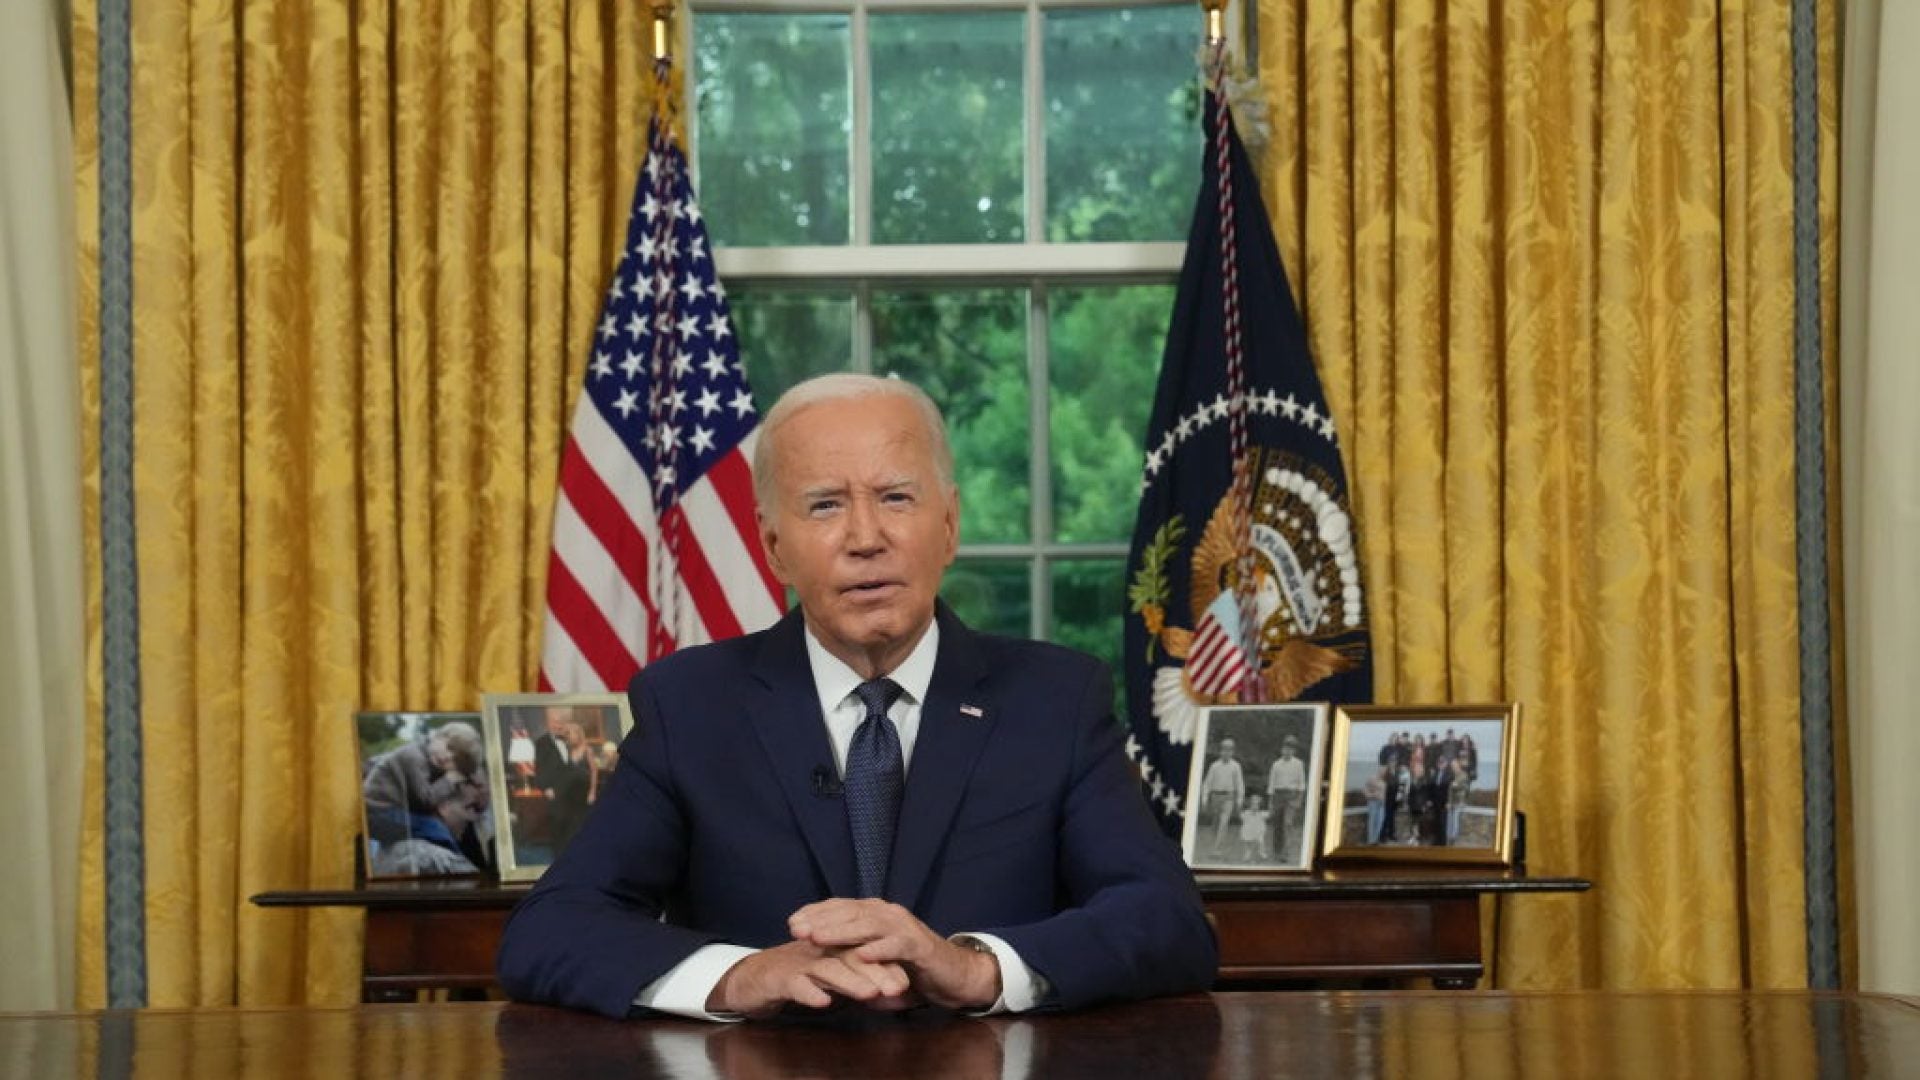 ‘The Best Way Forward Is To Pass The Torch To A New Generation’: President Biden Addresses The Nation On Decision To End Bid For Re-Election